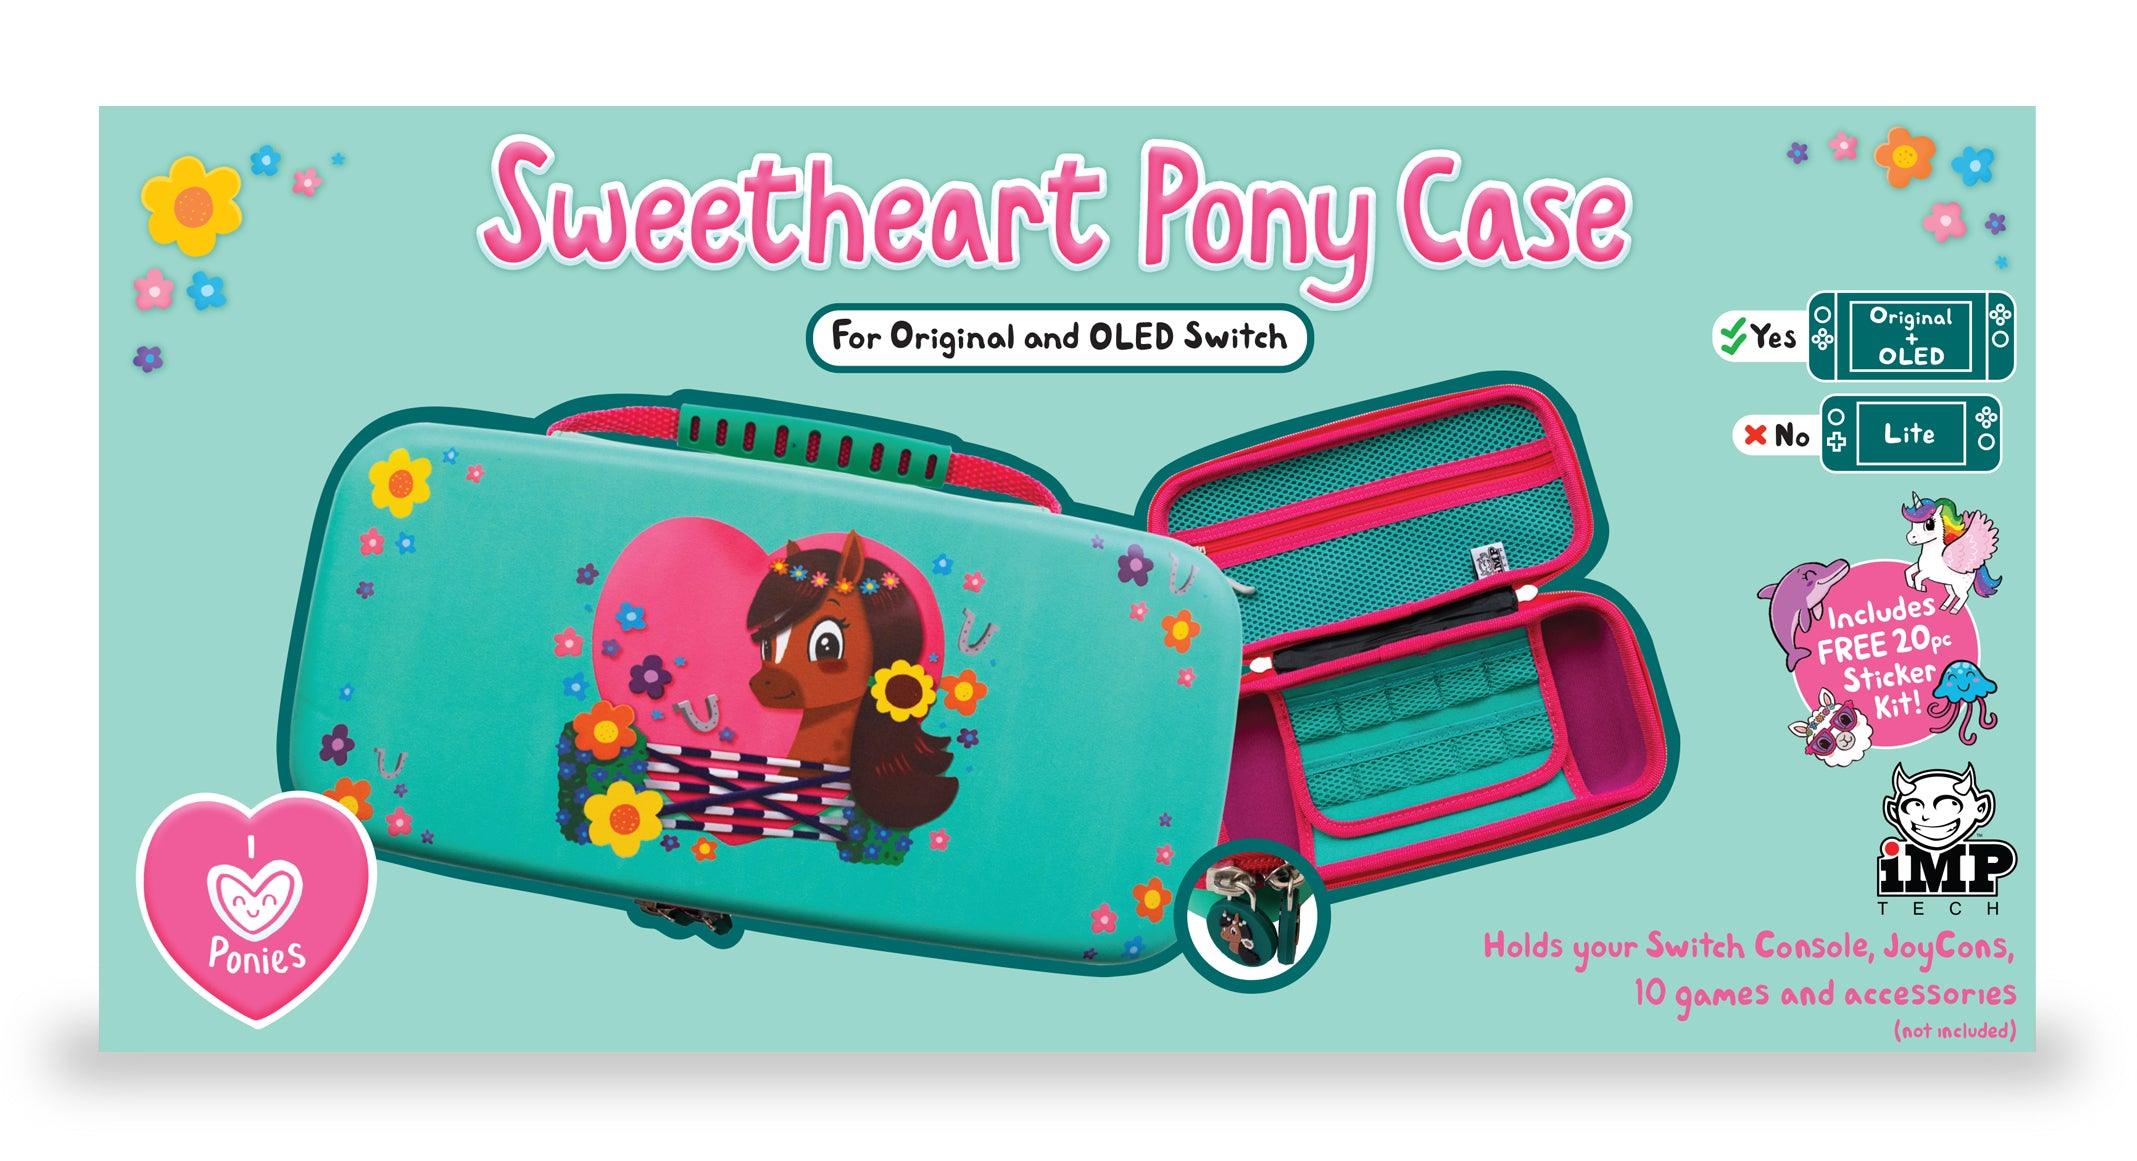 Sweetheart Pony Case - Want a New Gadget